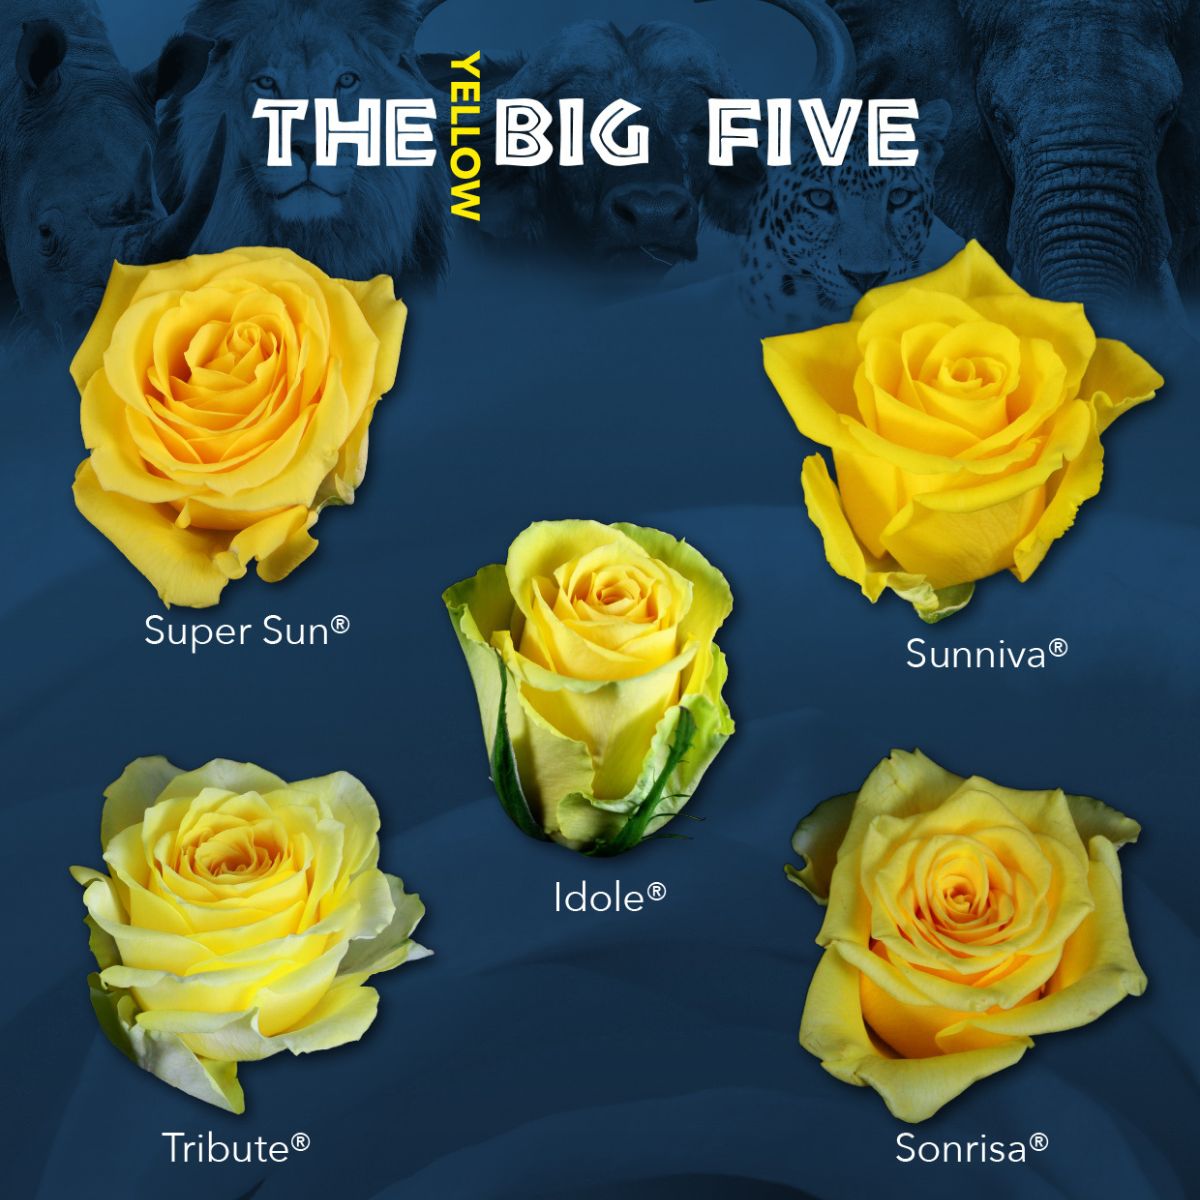 the-big-five-rose-edition-part-5-yellow-roses-featured